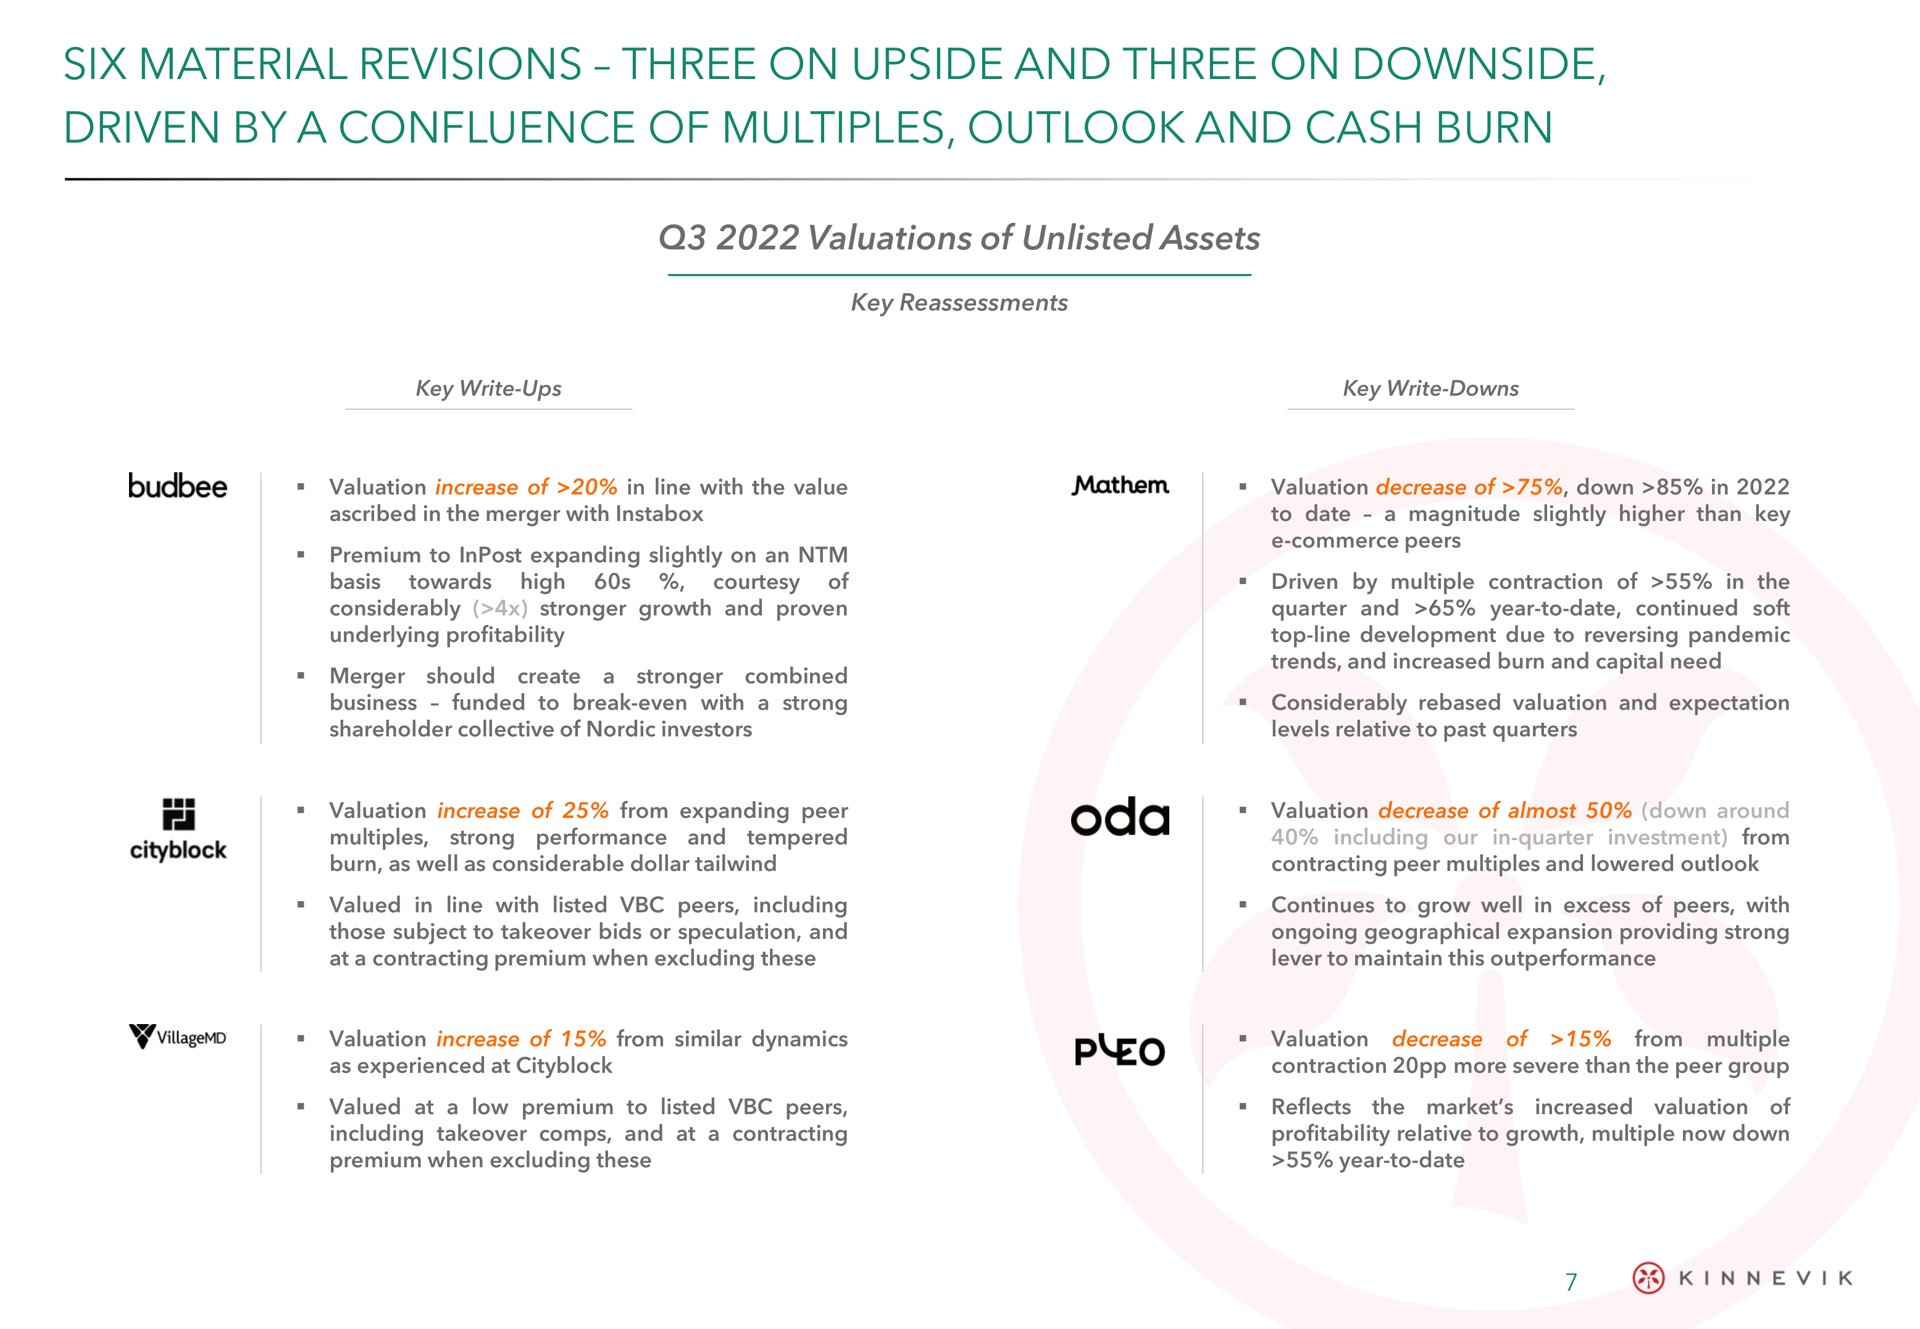 six material revisions three on upside and three on downside driven by a confluence of multiples outlook and cash burn oda | Kinnevik